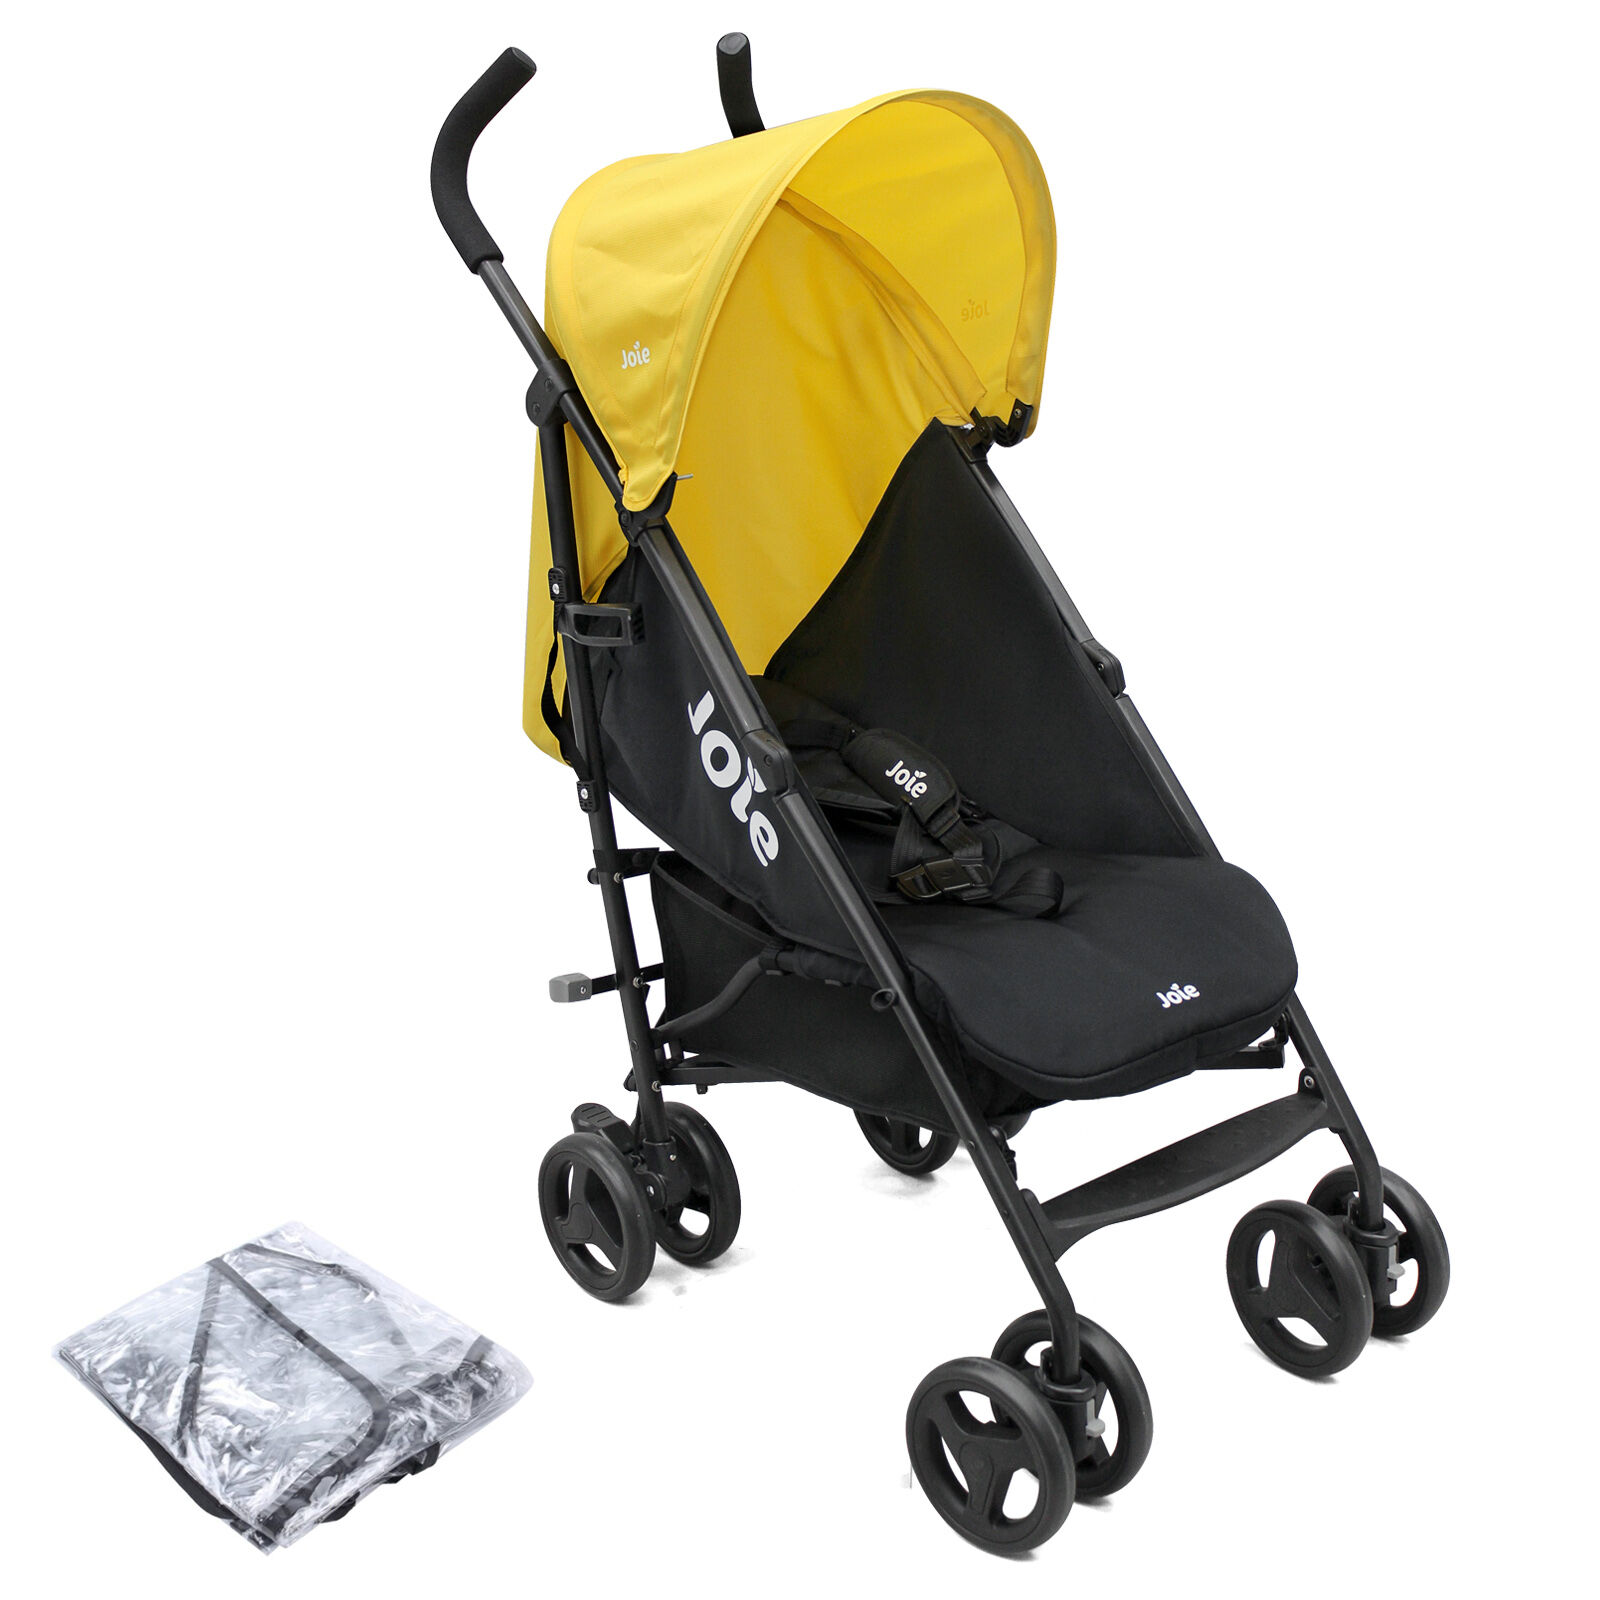 Joie Nitro Pushchair Stroller with Raincover - Yellow